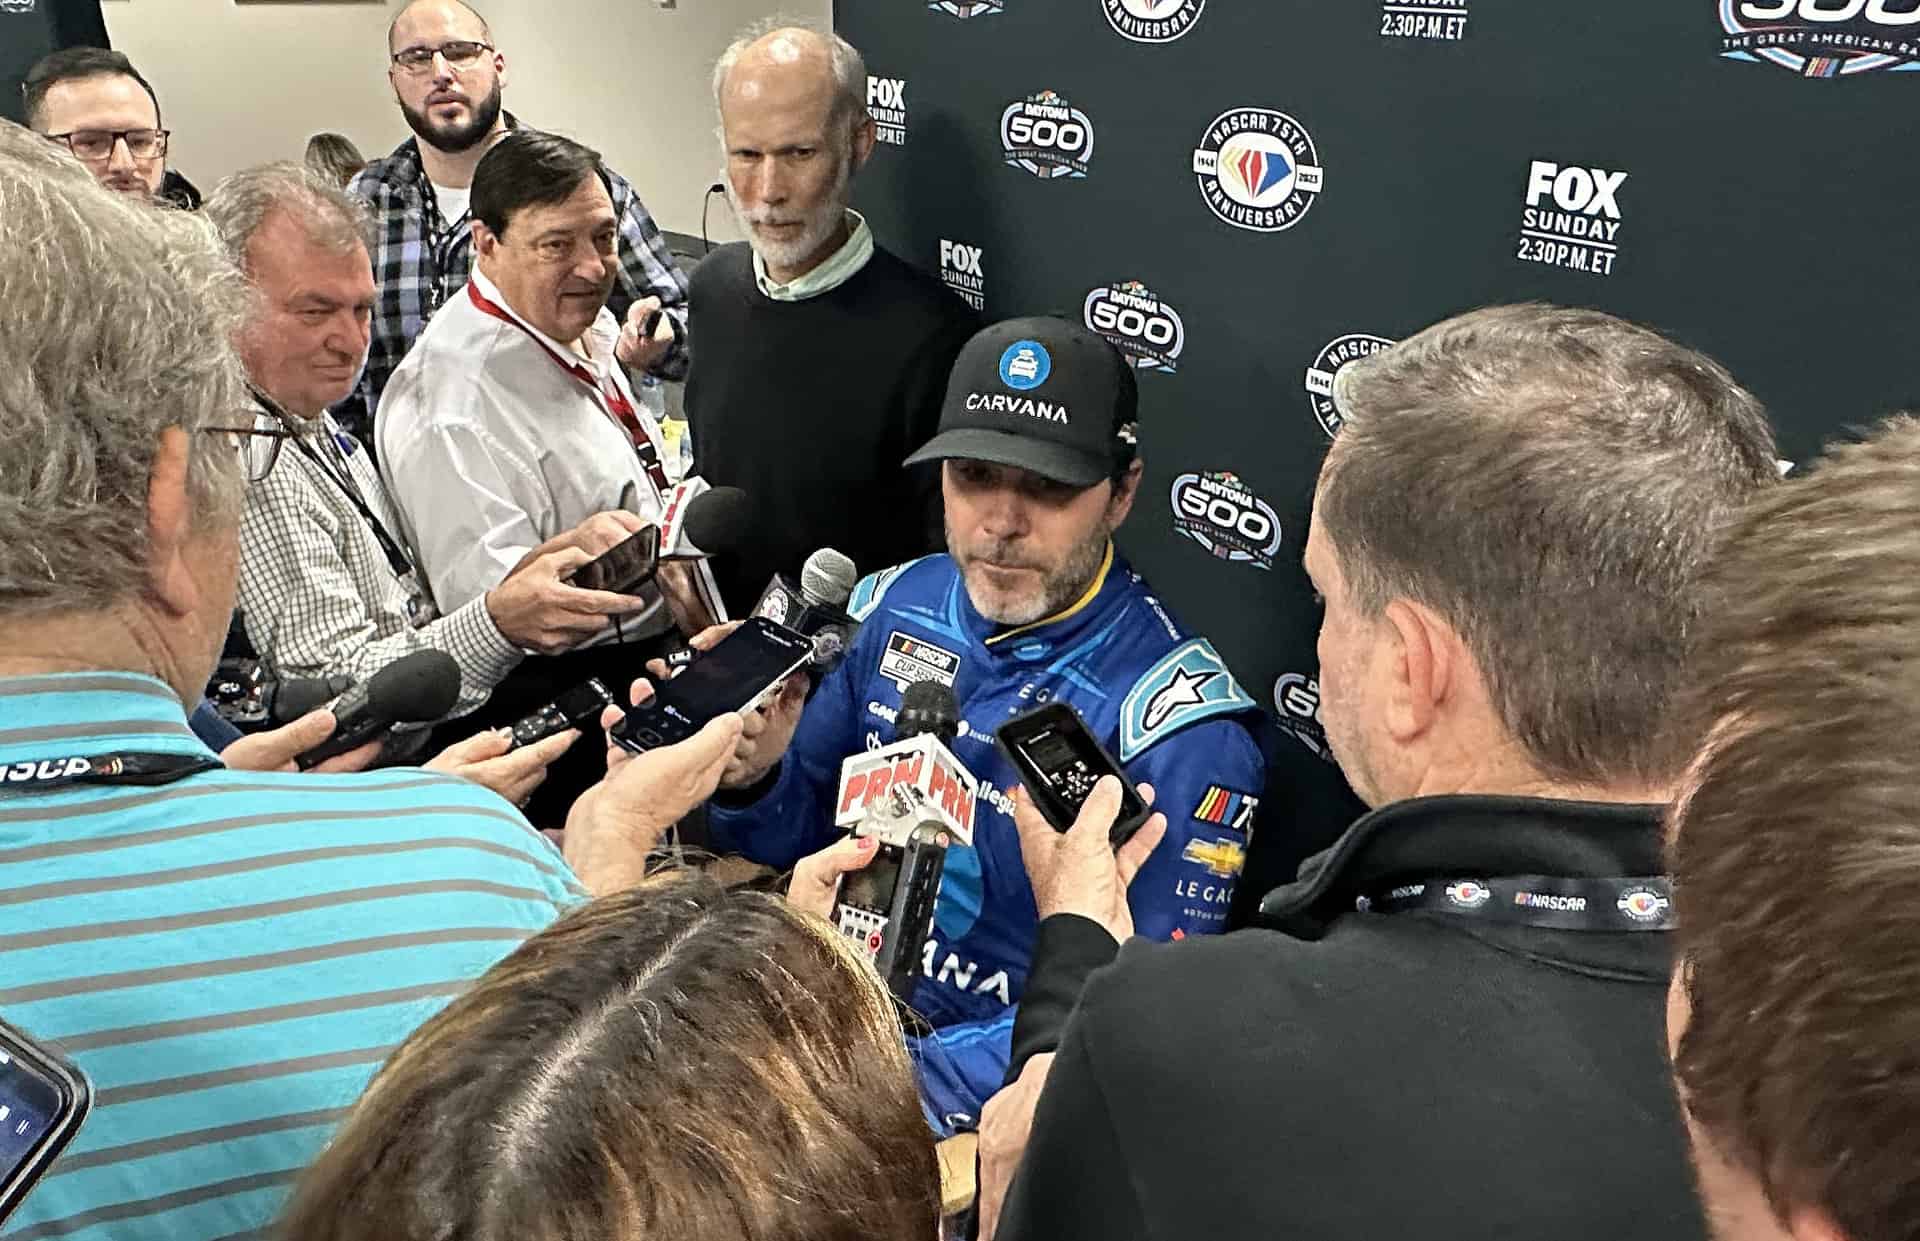 Jimie johnson takes questions for media ahead of his attempt to qualify for the 2023 daytona 500. Photo by jerry jordan/kickin' the tires